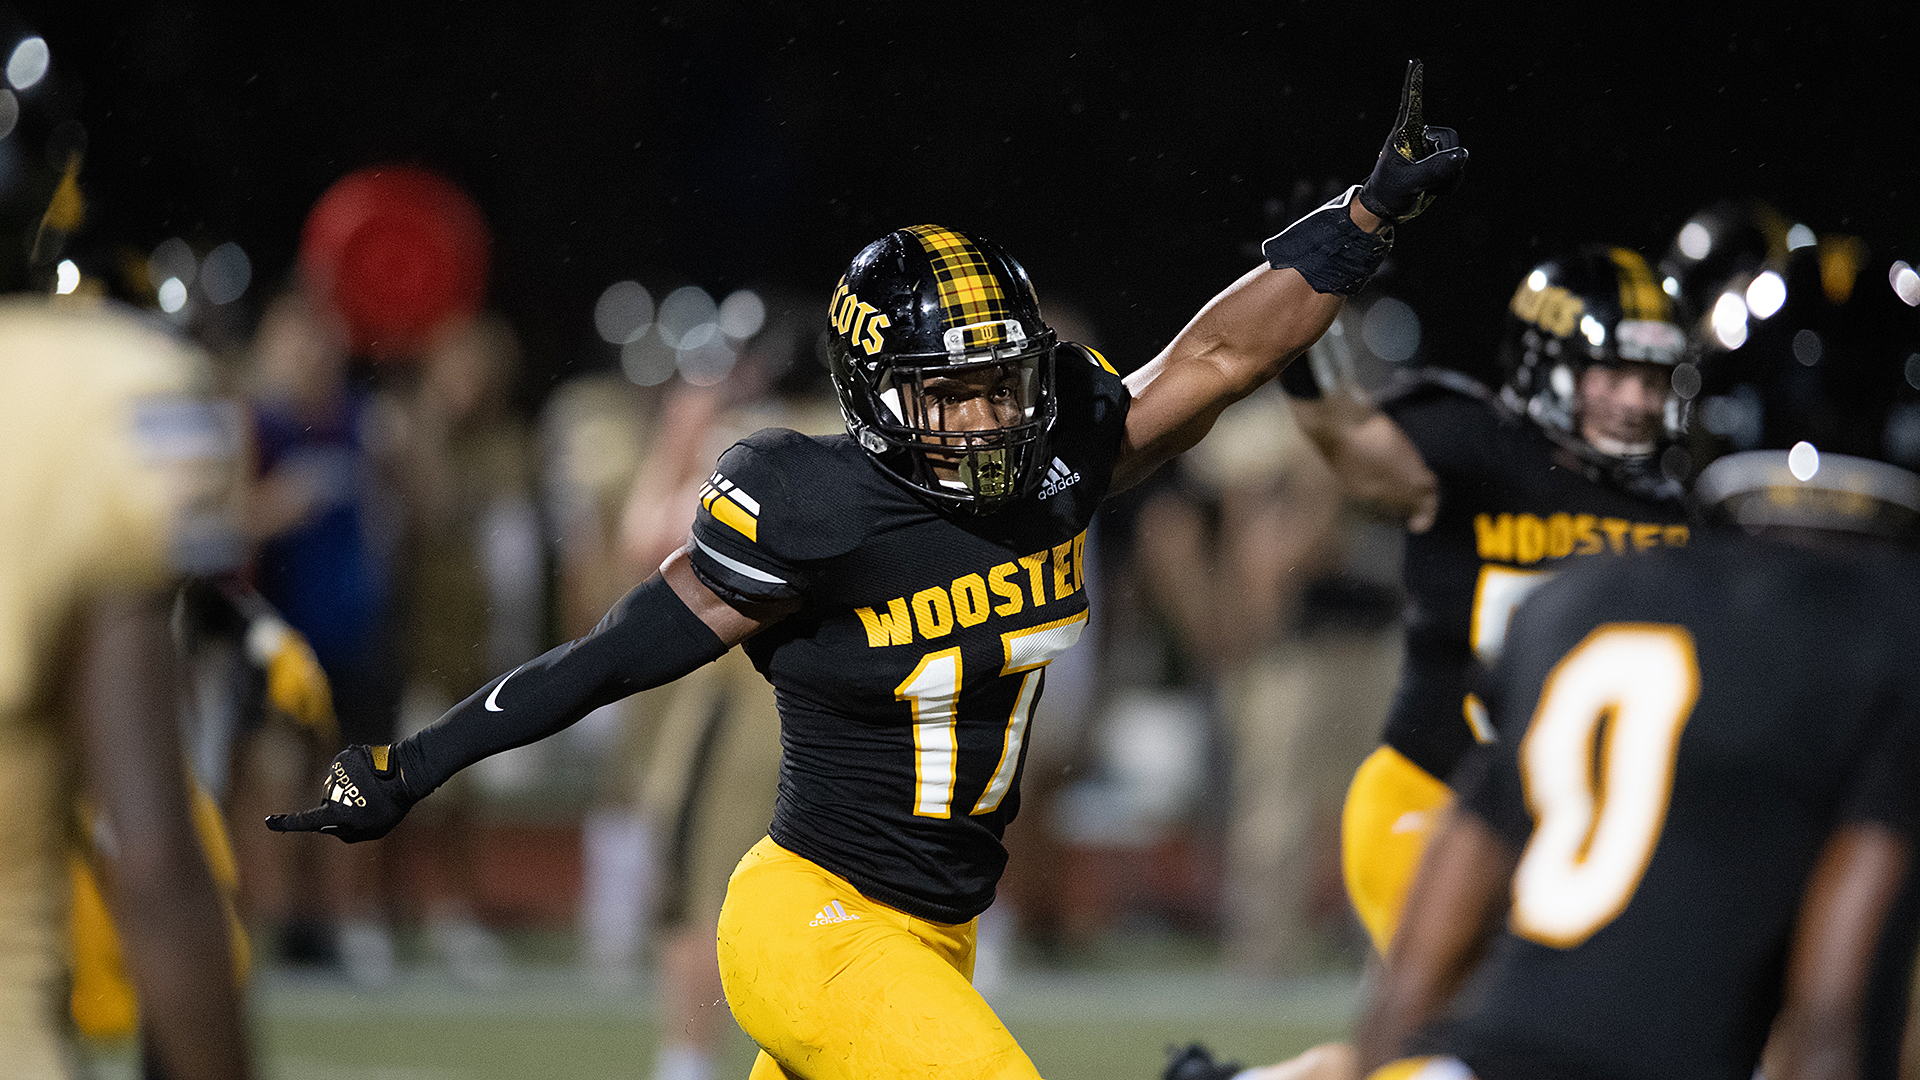 Dorion Talley, Wooster Football